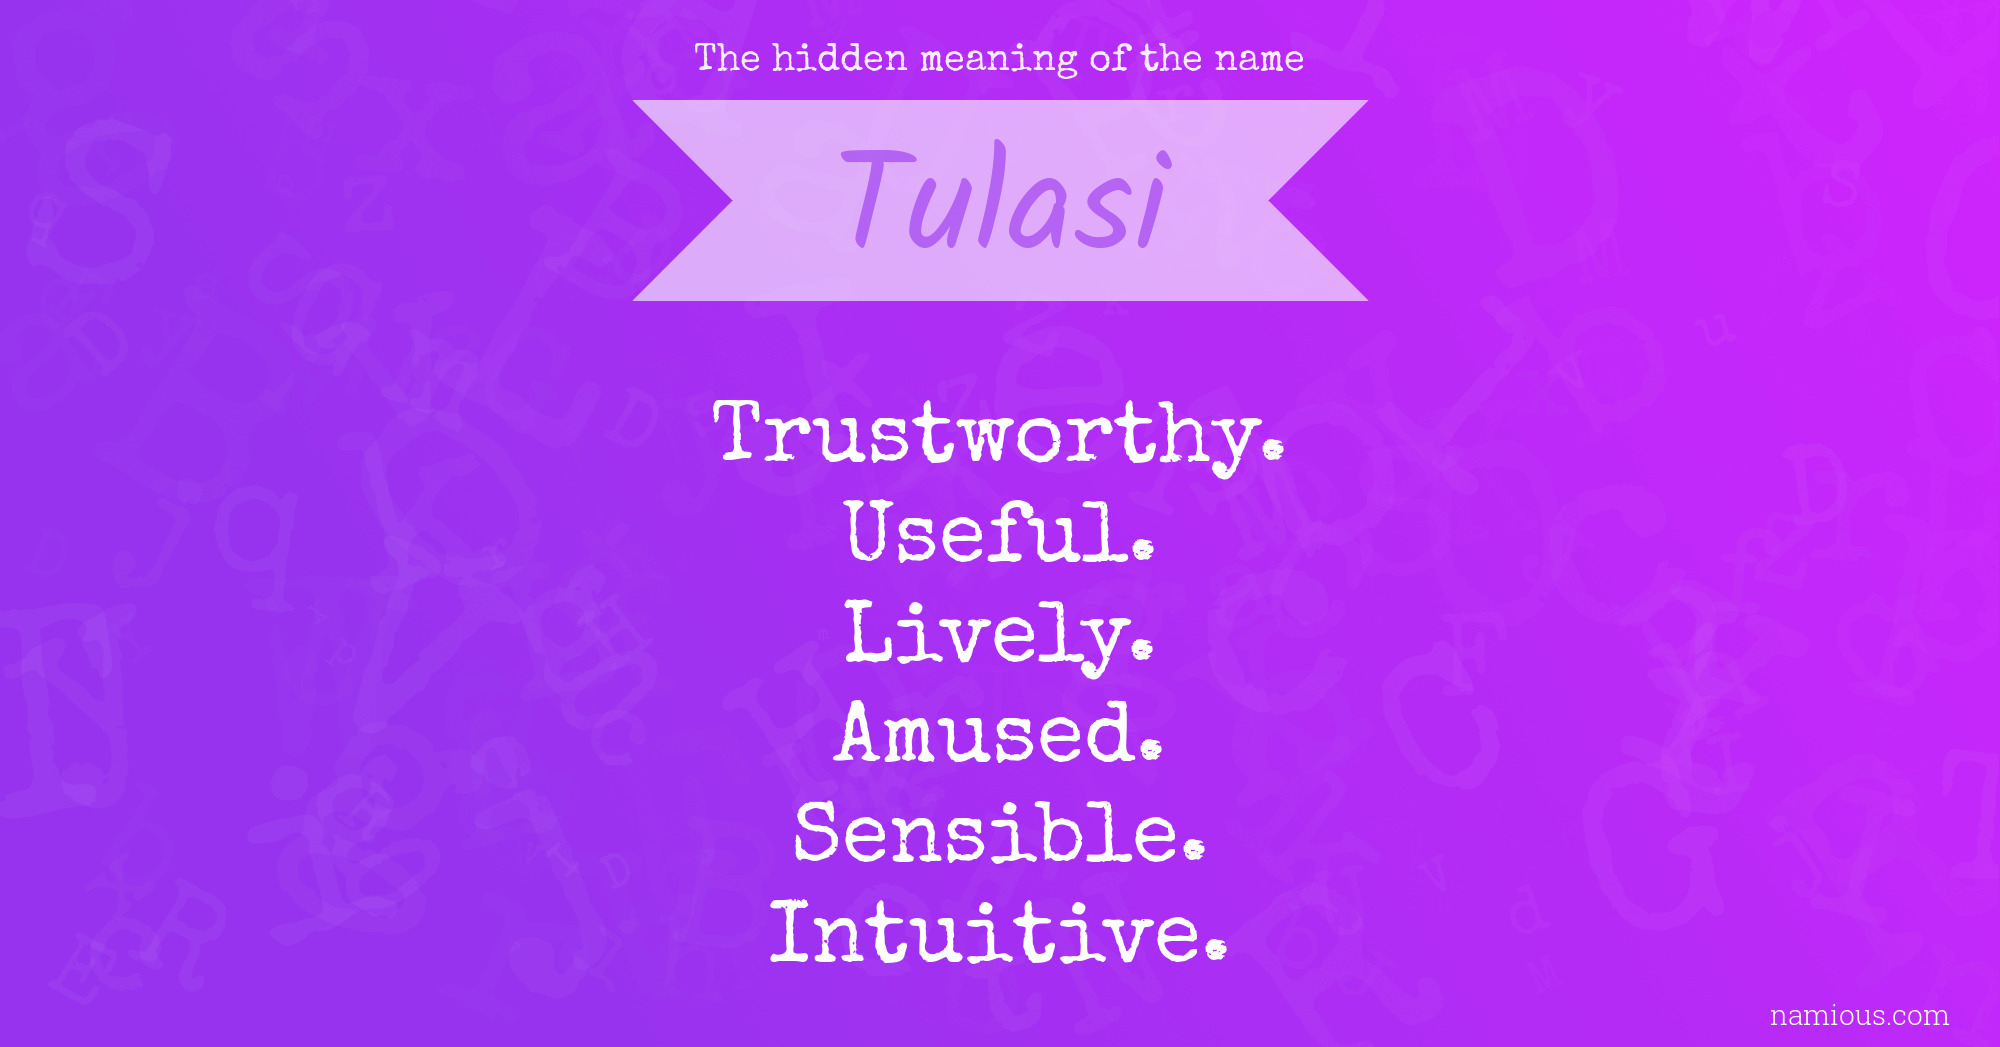 The hidden meaning of the name Tulasi